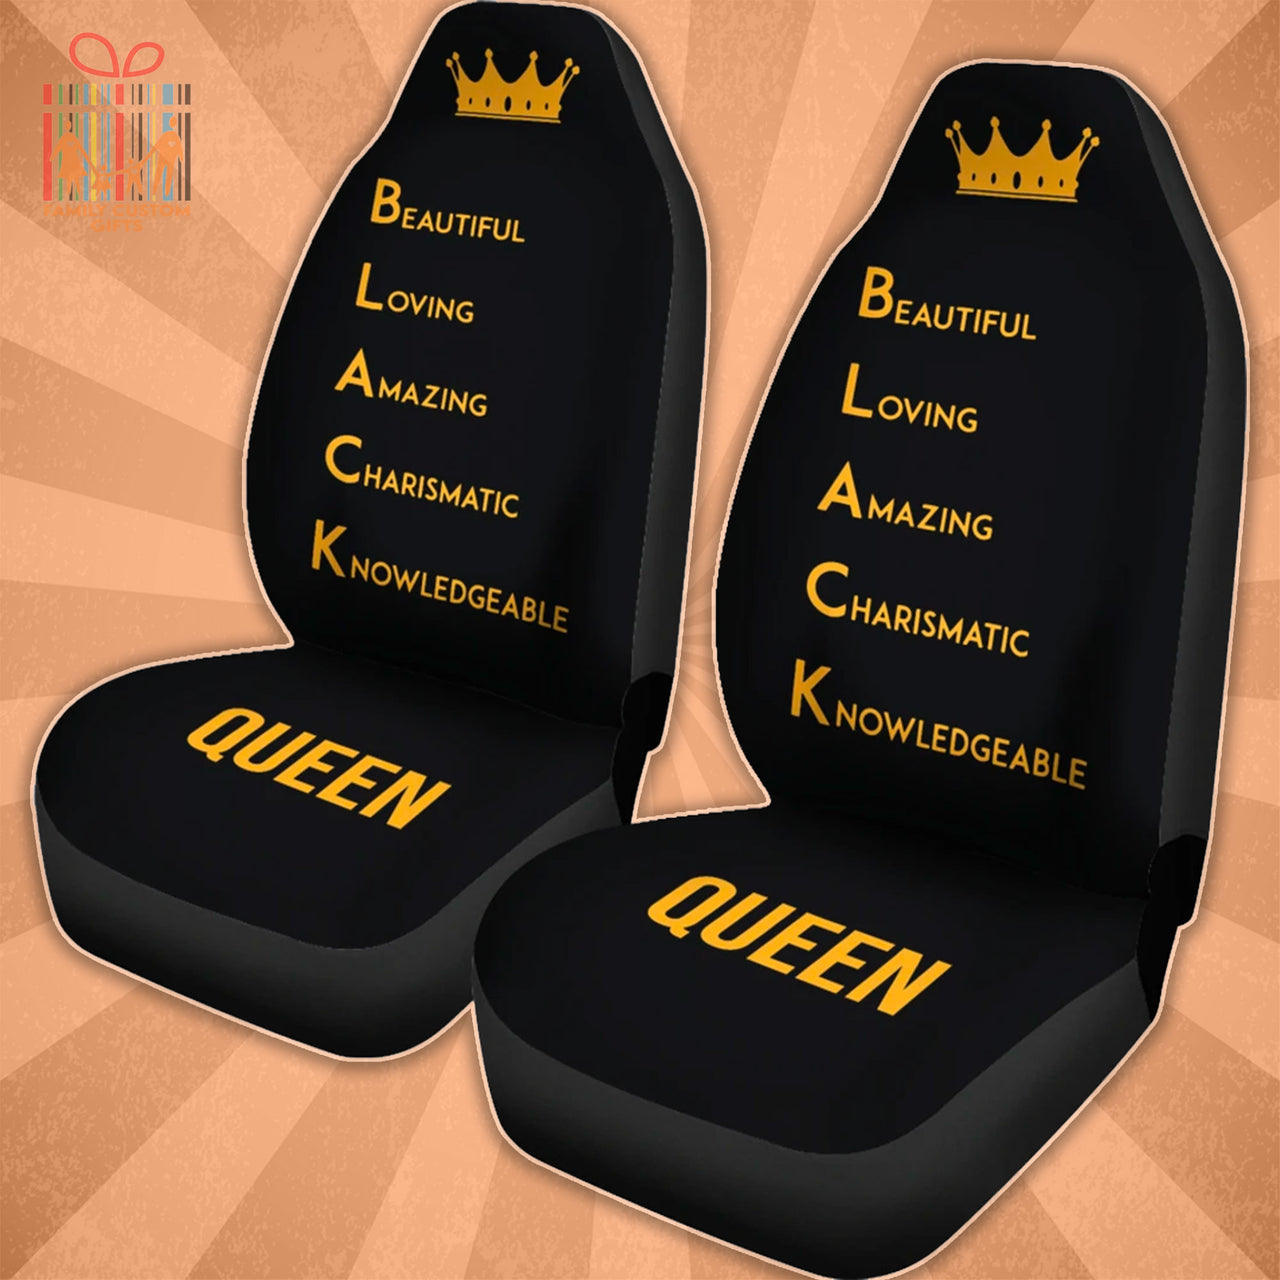 Custom Car Seat Cover Black Queen Seat Covers for Cars – FAMILY GIFTS